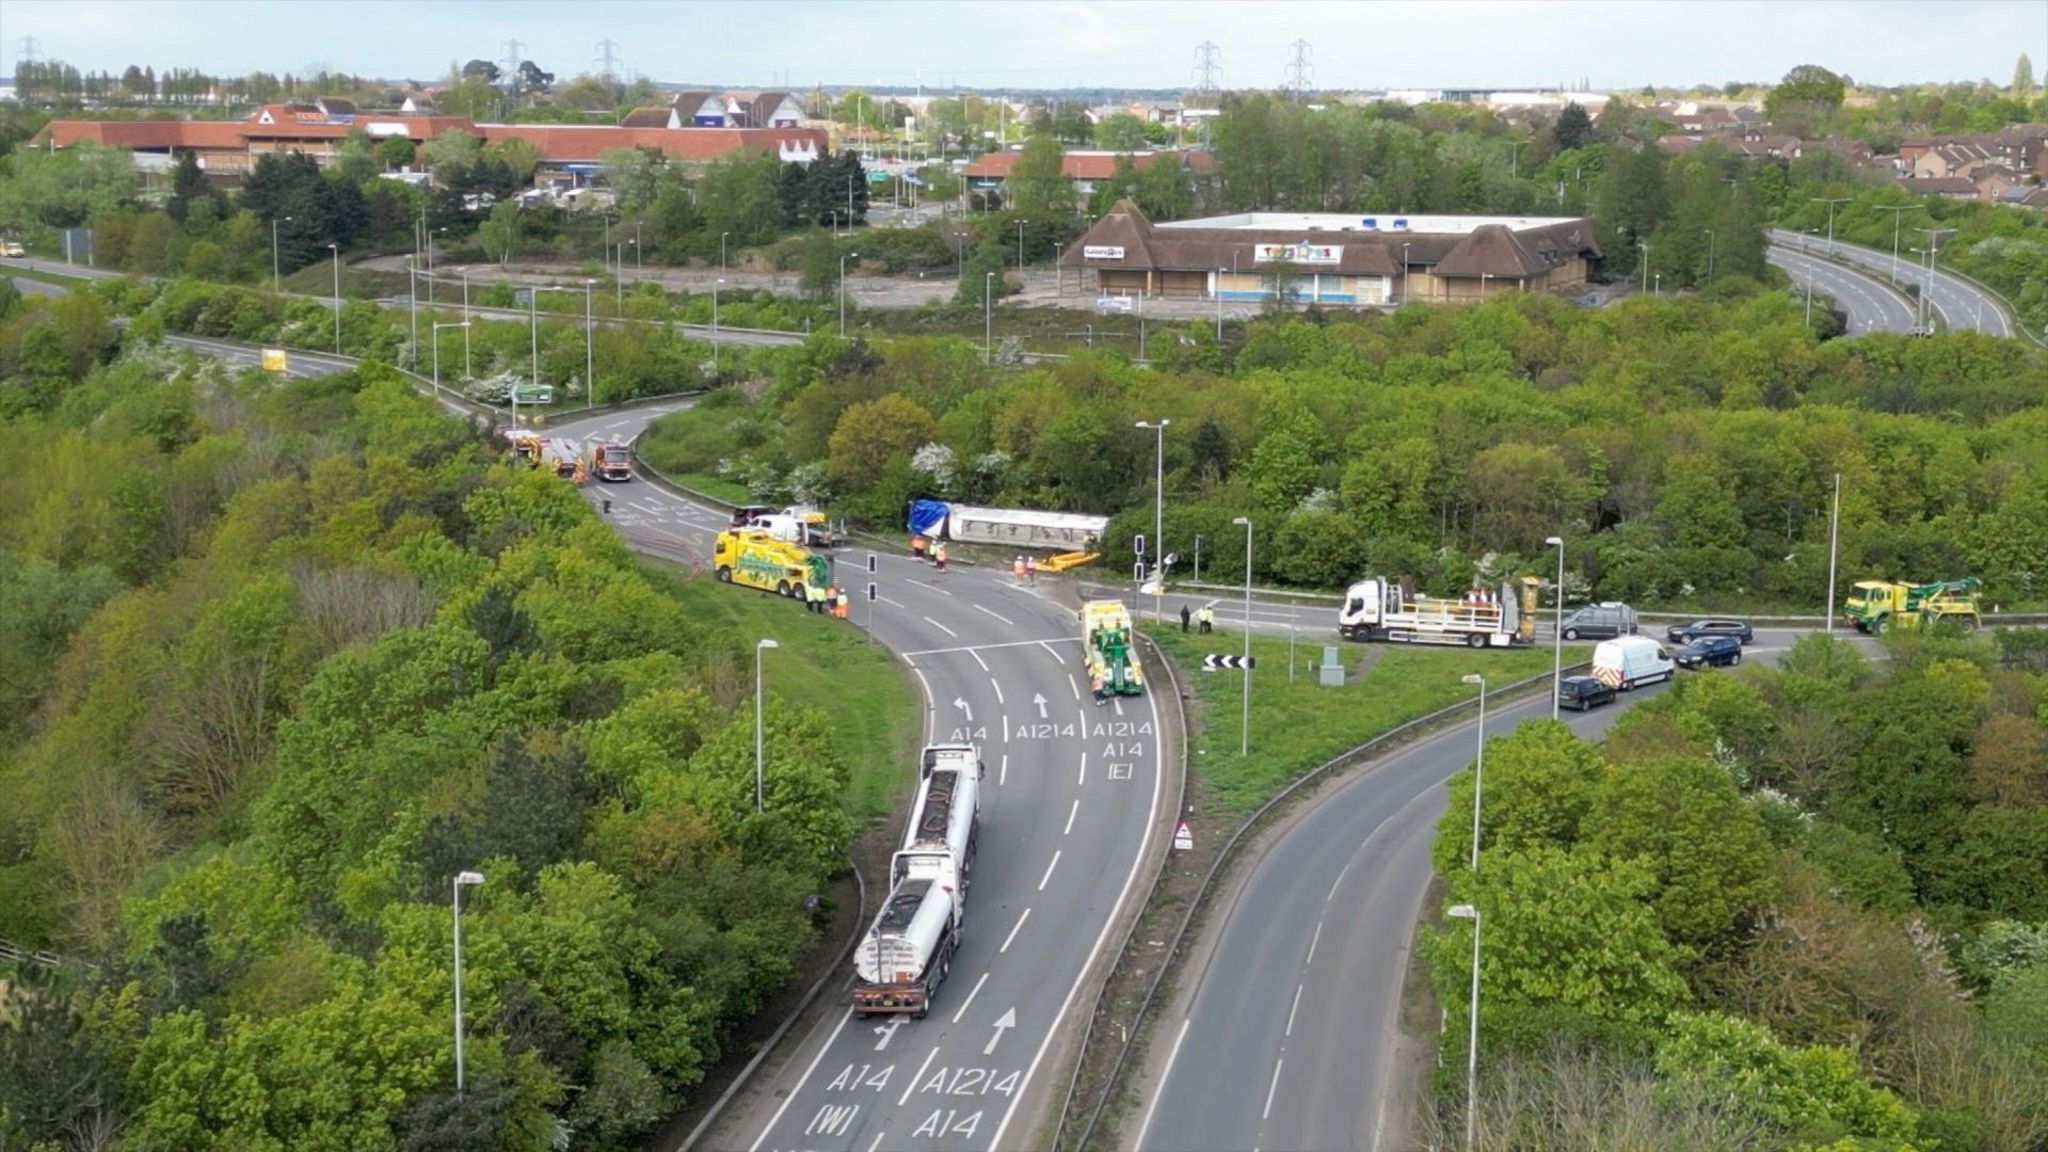 The A12 Copdock Interchange roundabout during the road closure